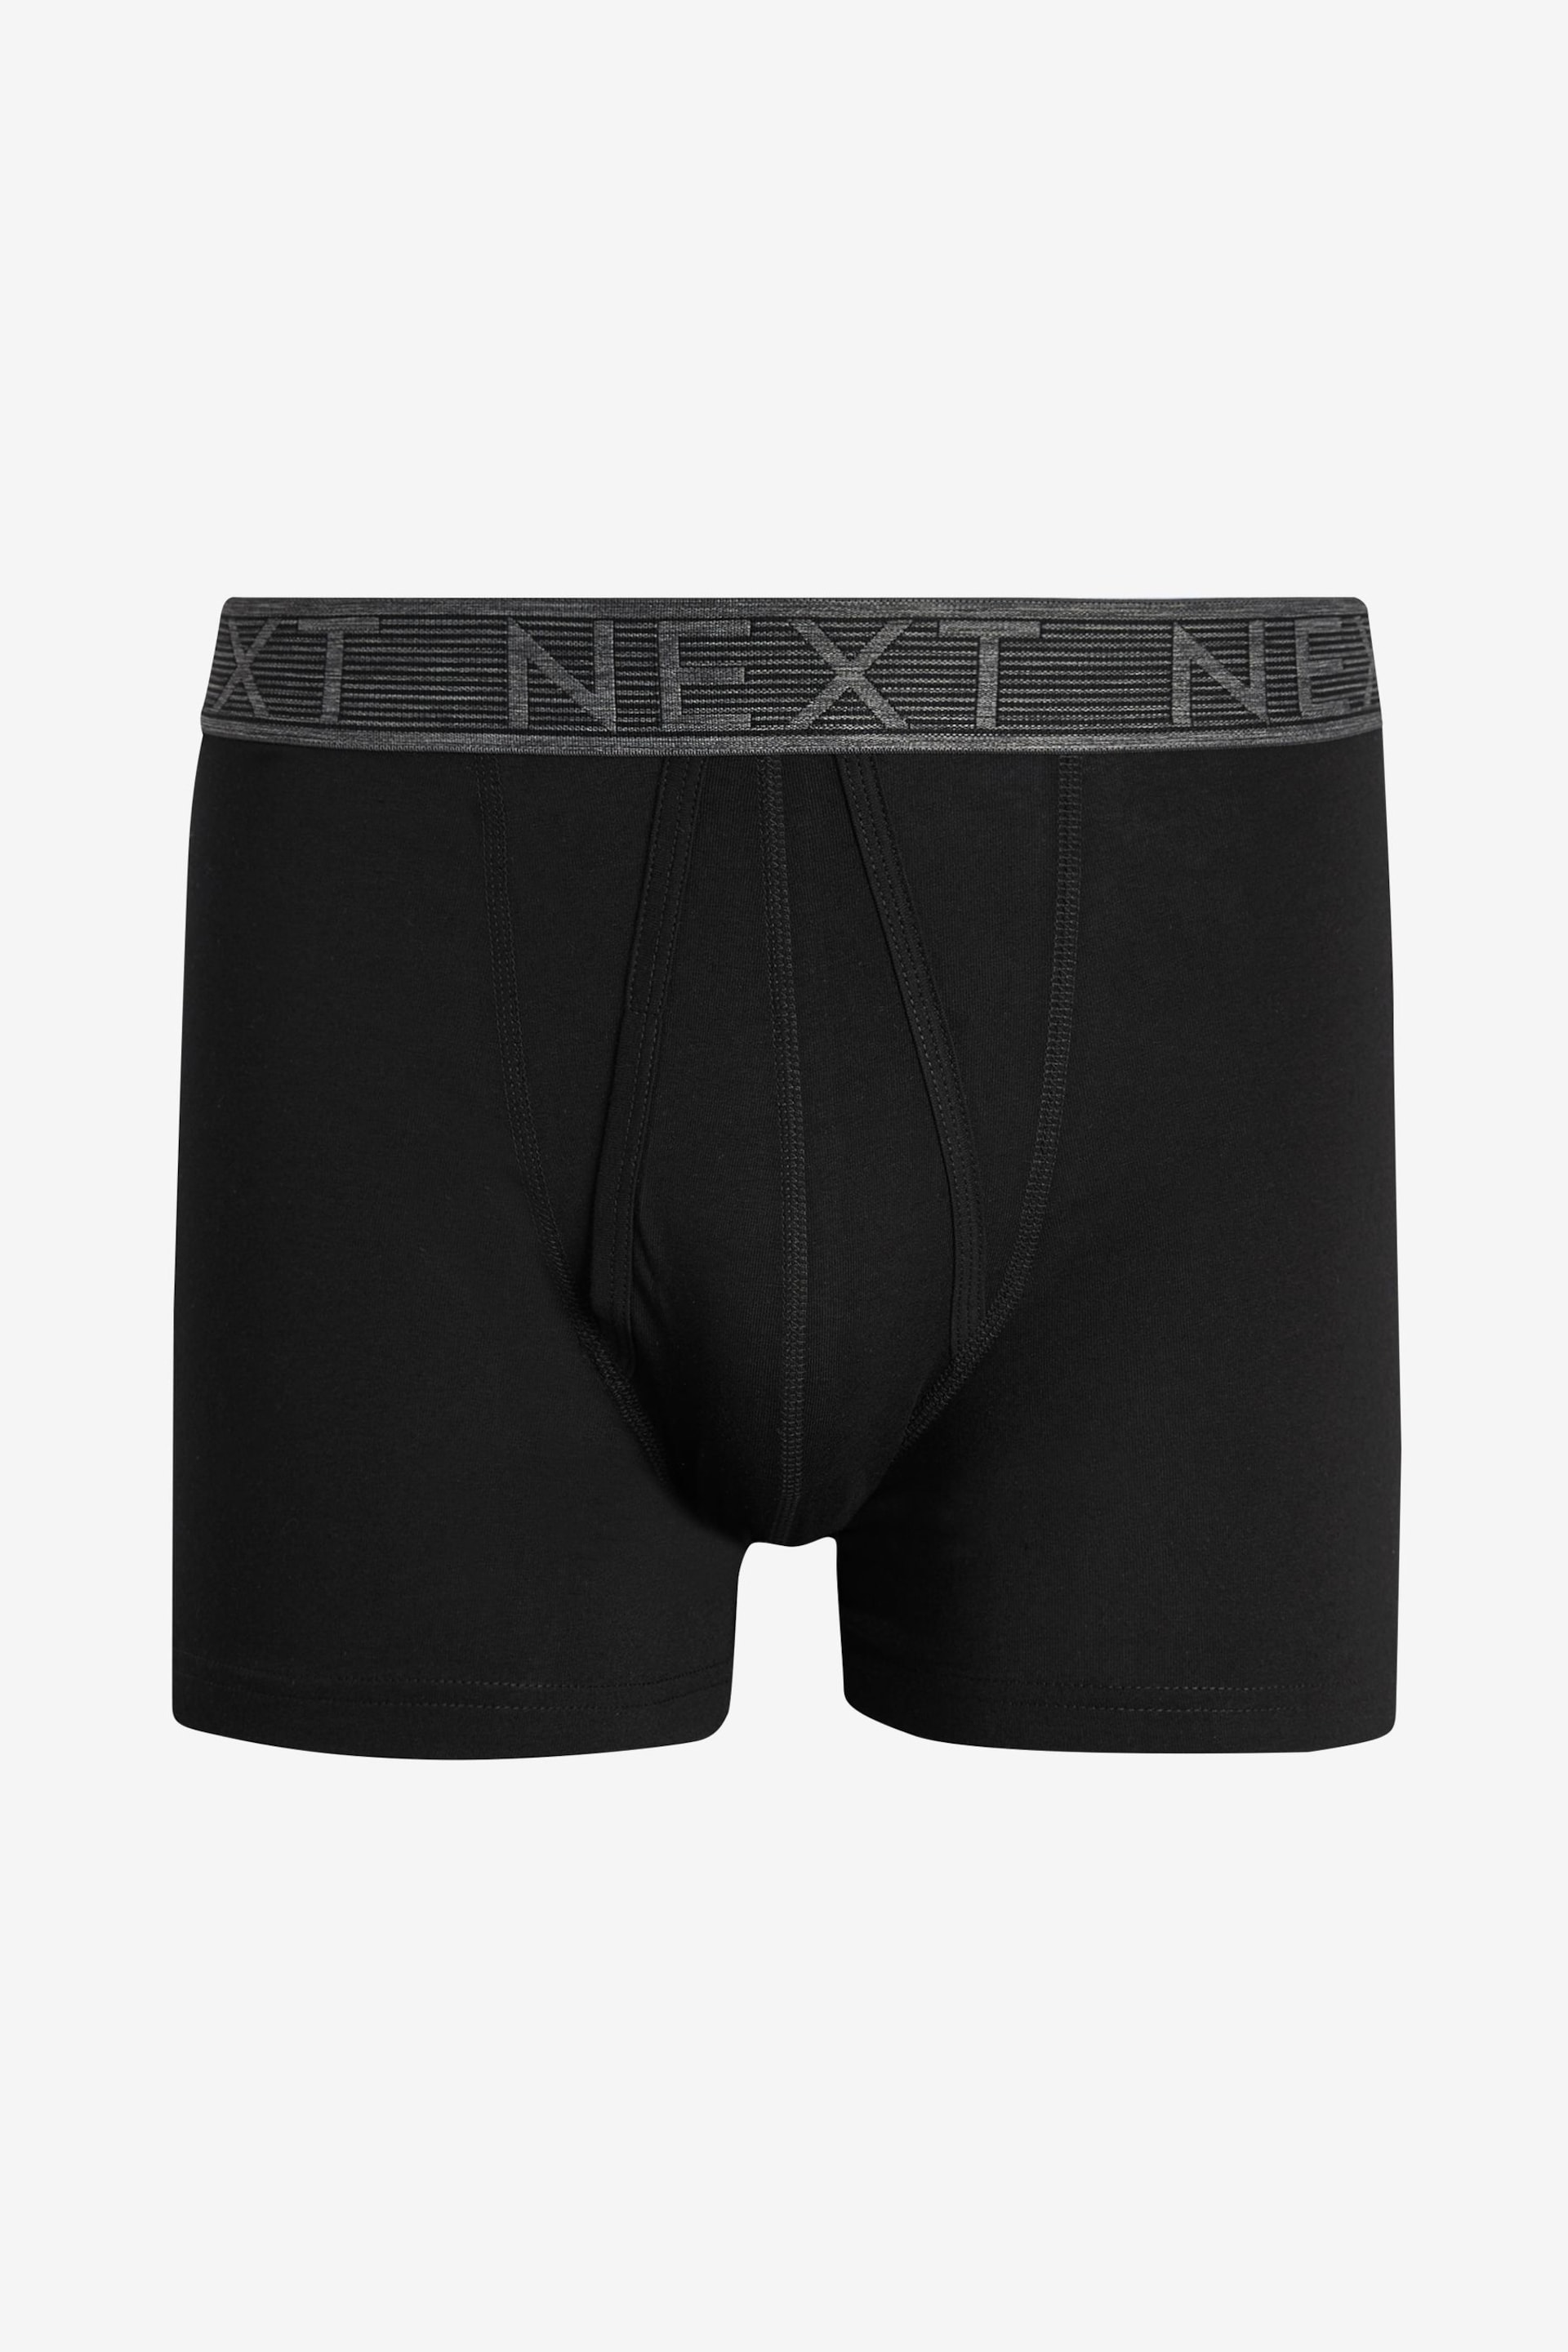 Grey 4 pack A-Front Boxers - Image 4 of 7